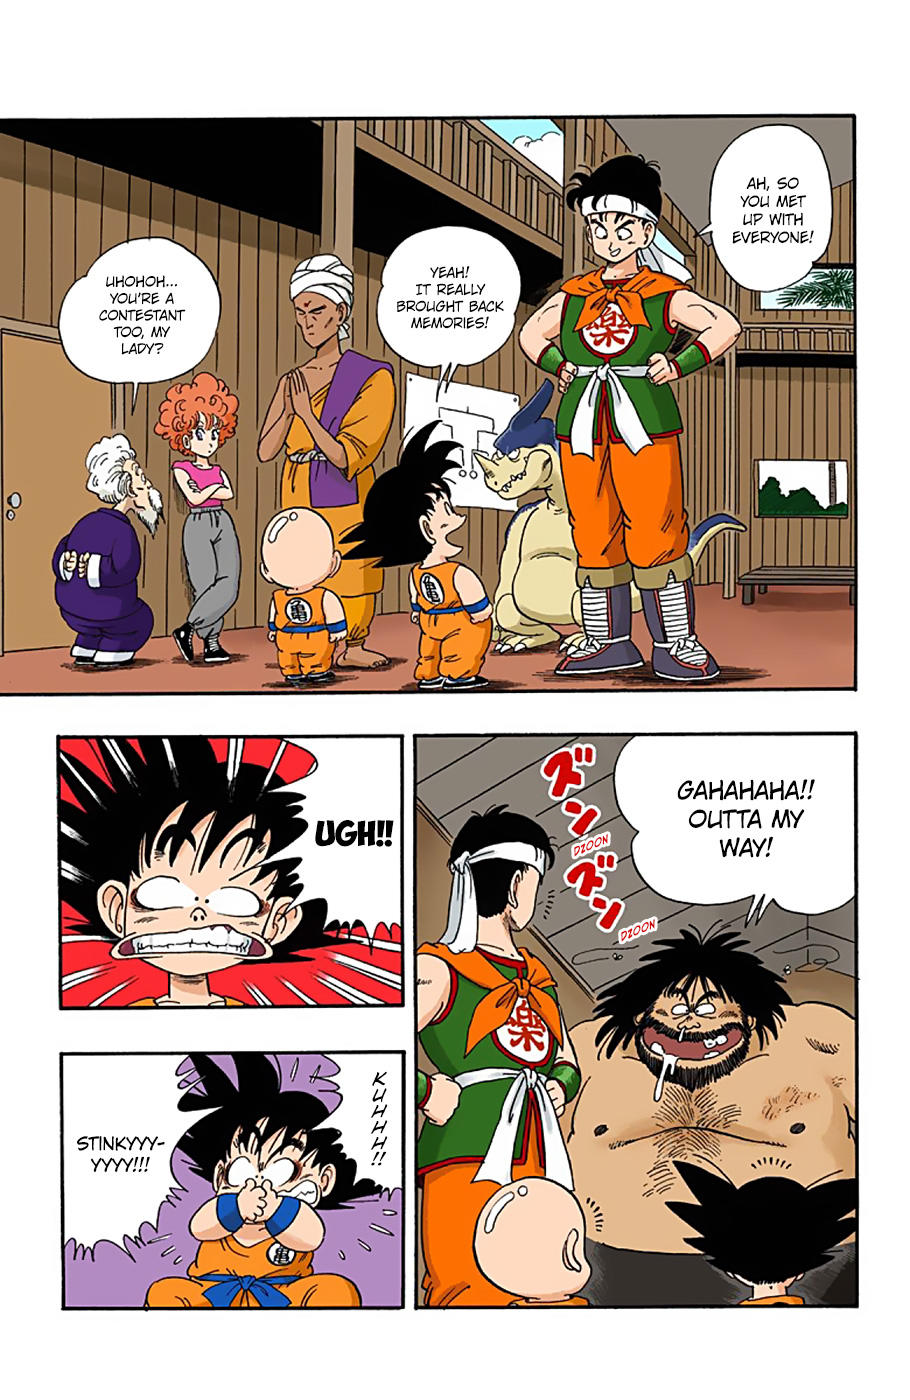 Dragon Ball - Full Color Edition Vol.3 Chapter 35: The Match-Ups Decided!! page 7 - Mangakakalot